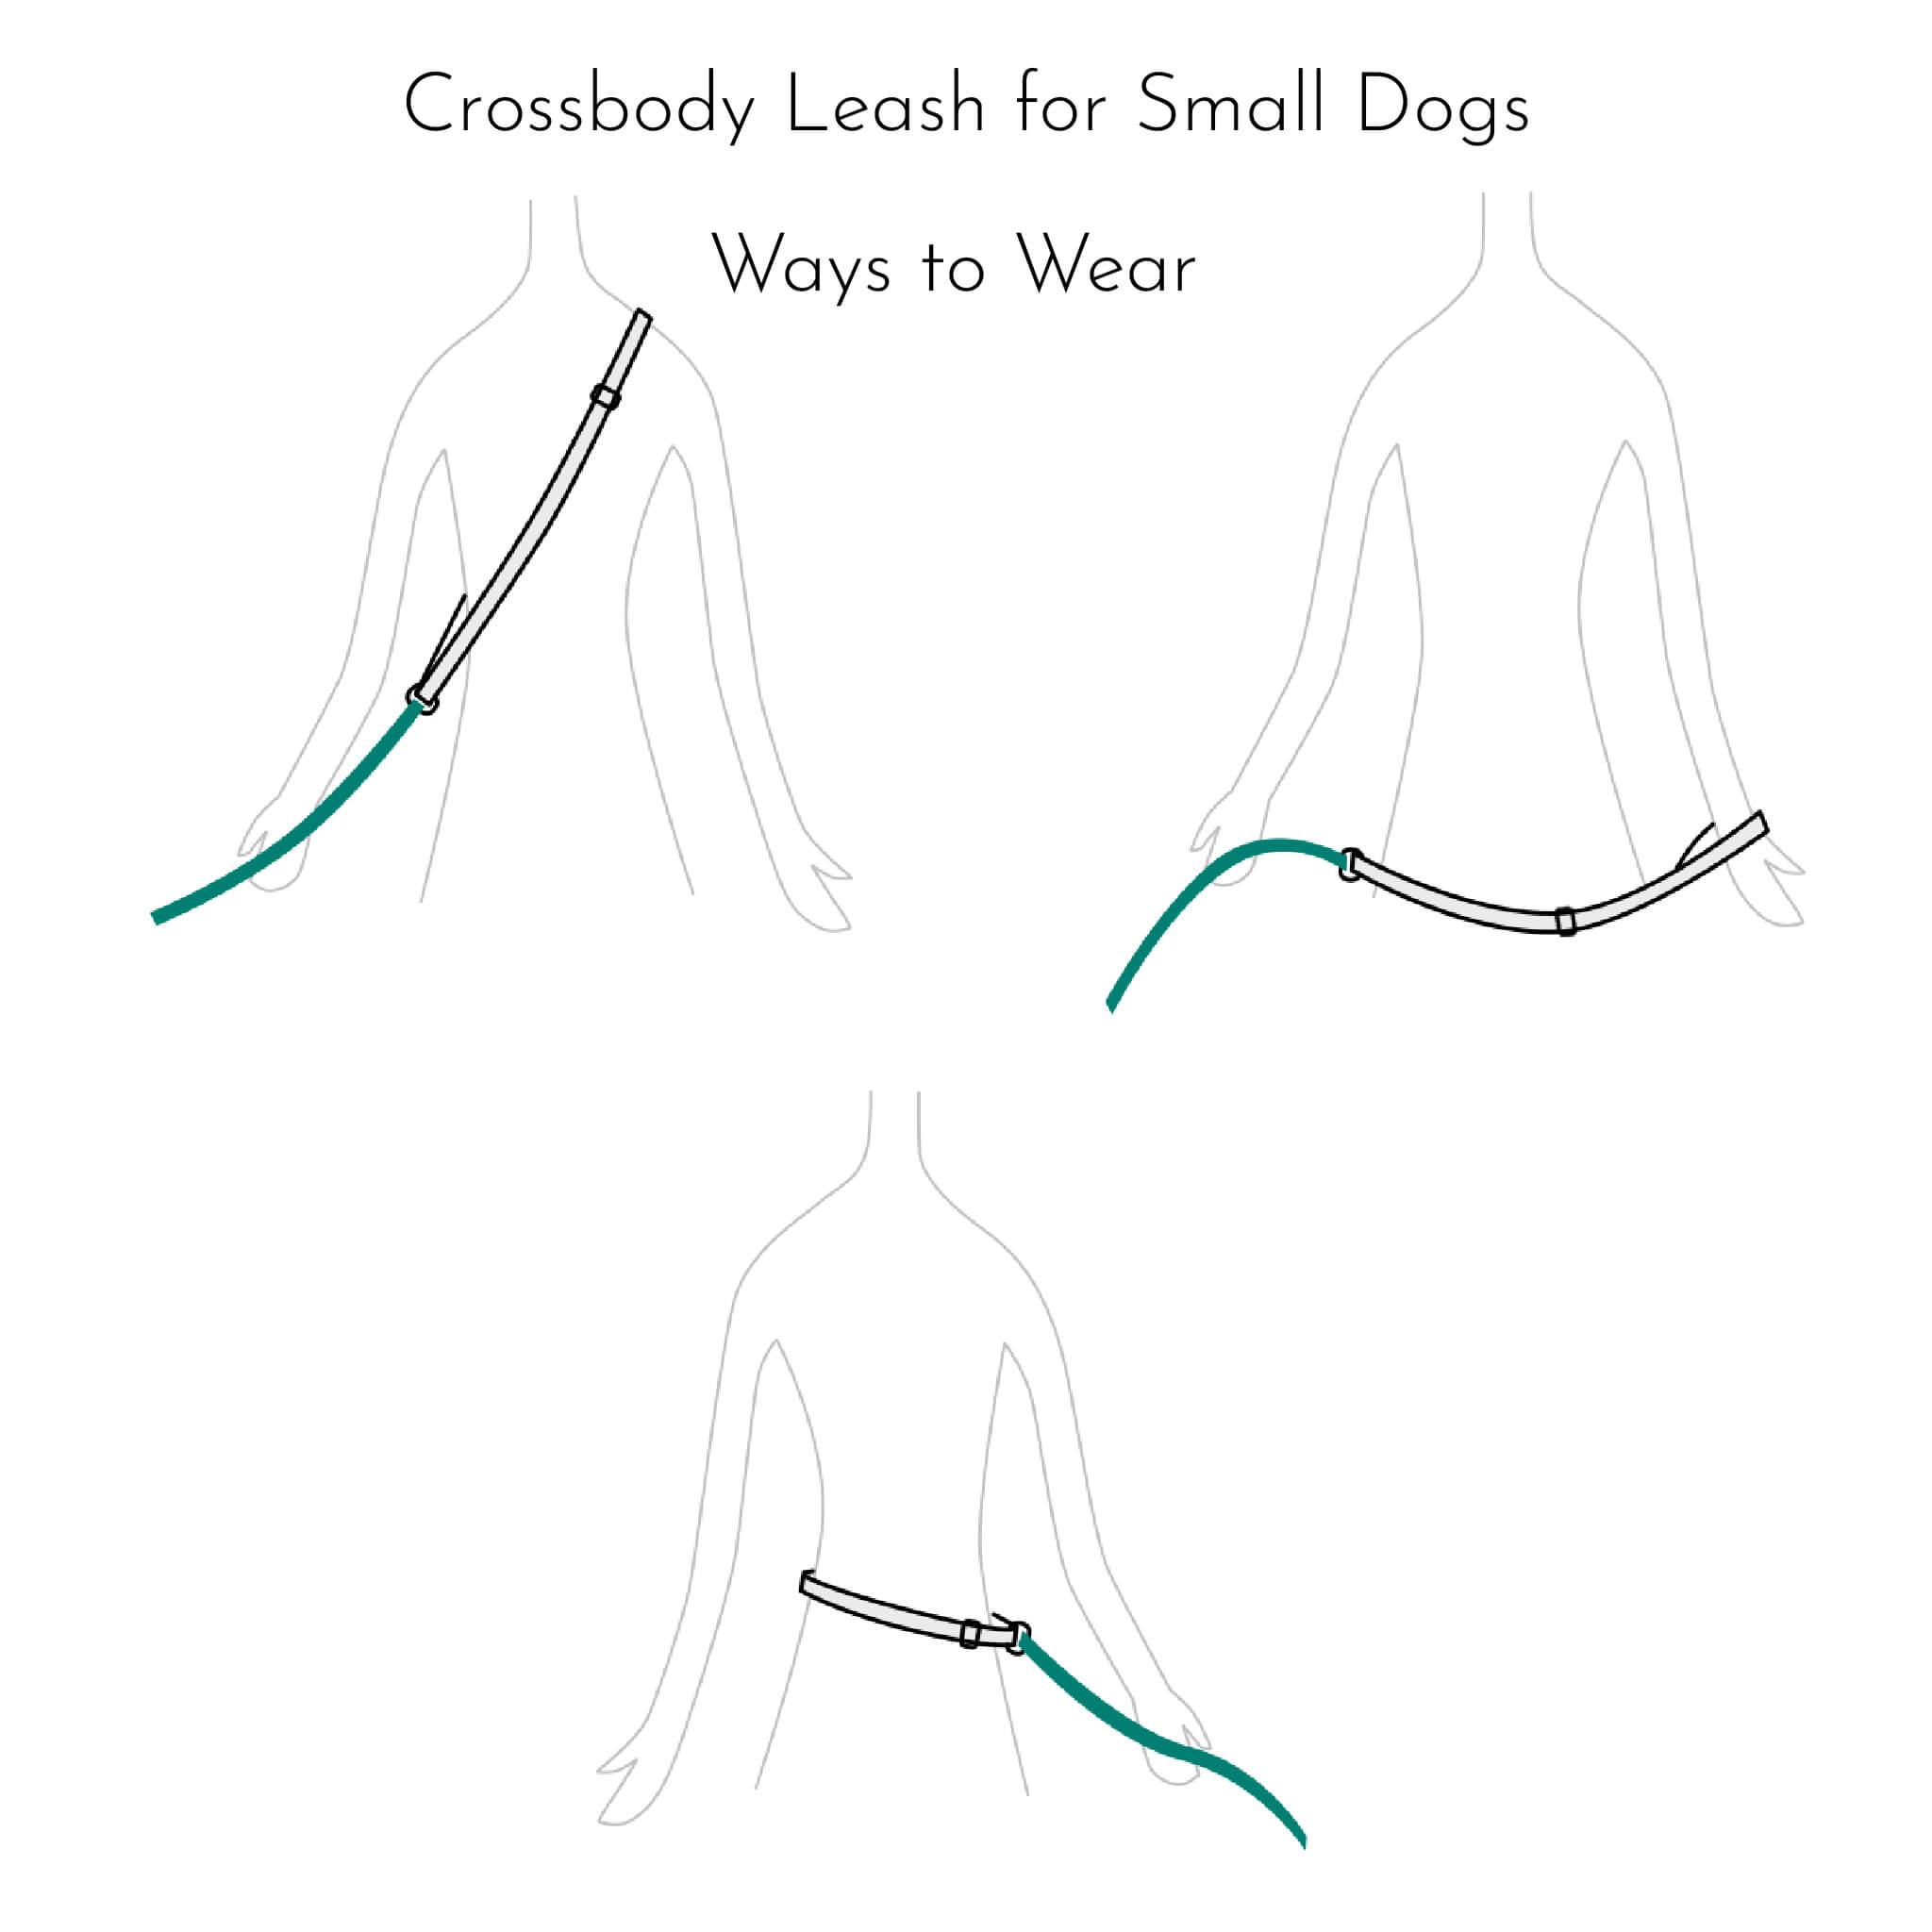 ways to wear crossbody leash for small dogs